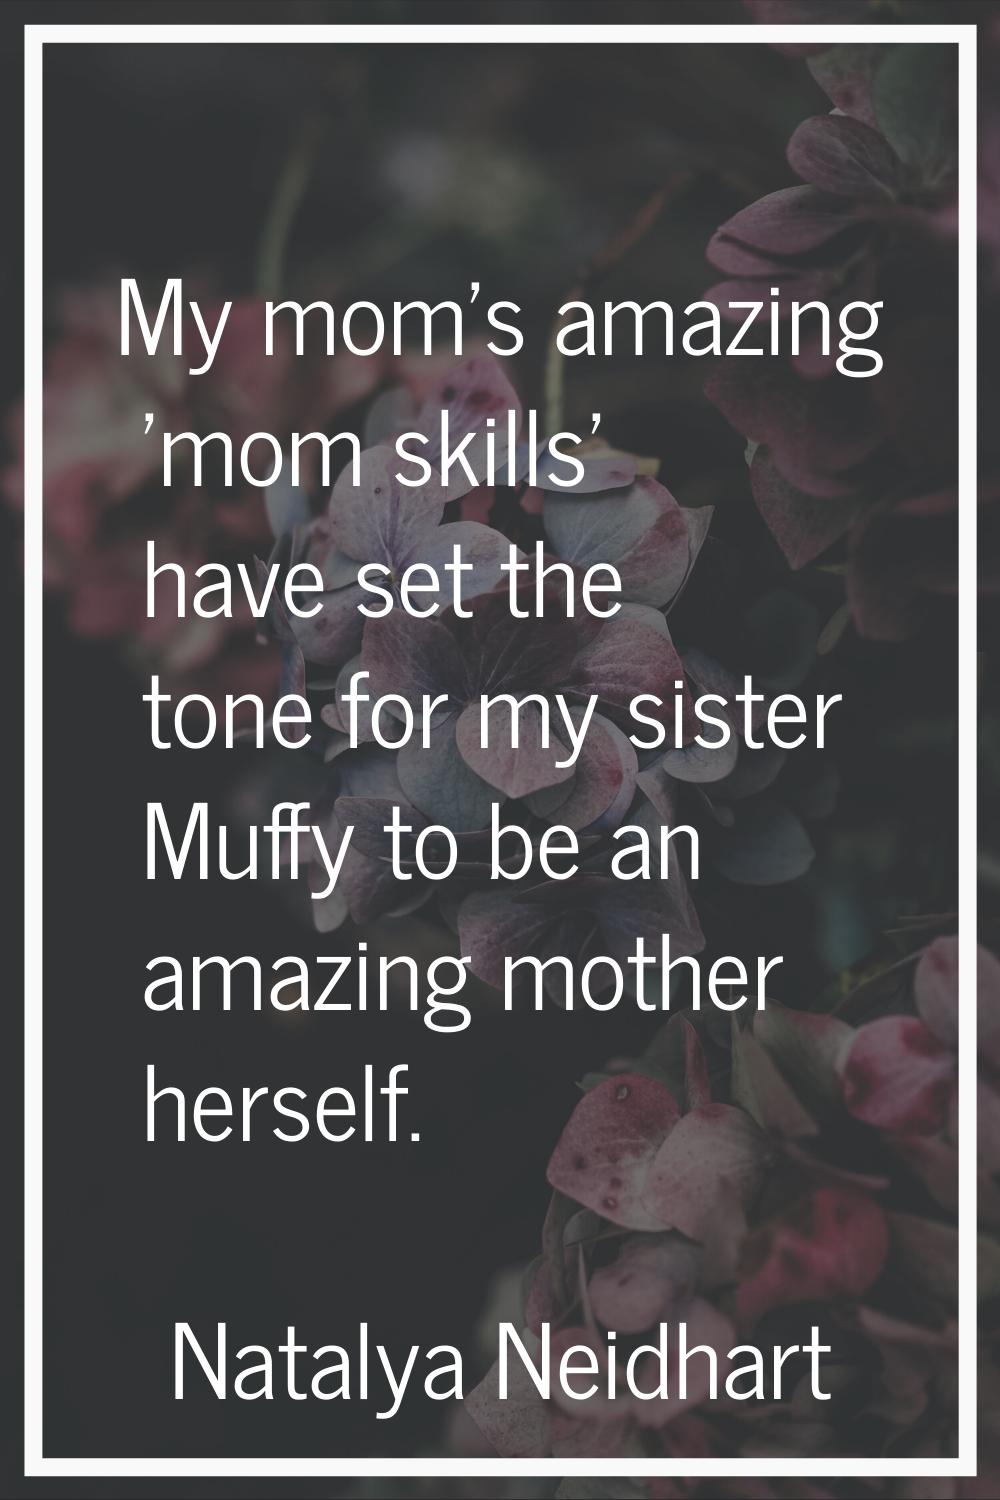 My mom's amazing 'mom skills' have set the tone for my sister Muffy to be an amazing mother herself